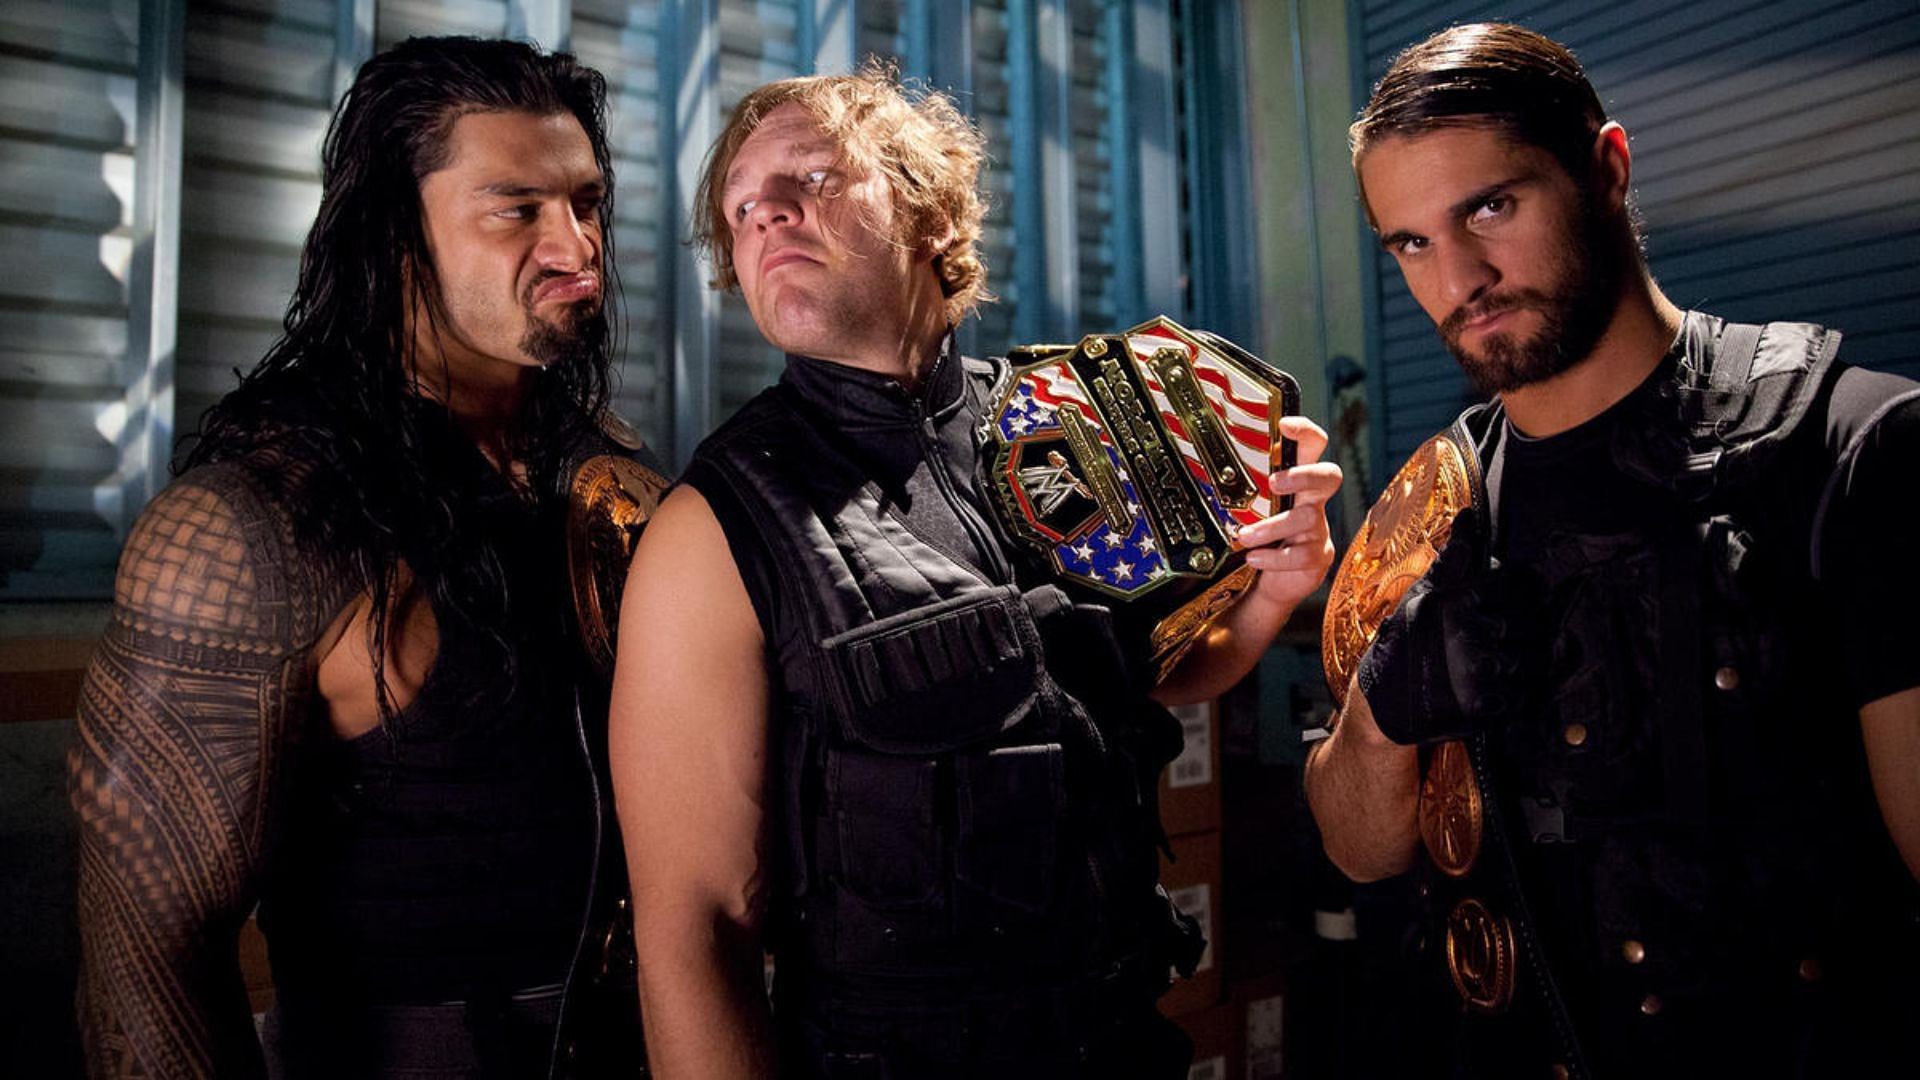 The Shield had one of the best WWE debuts in the company